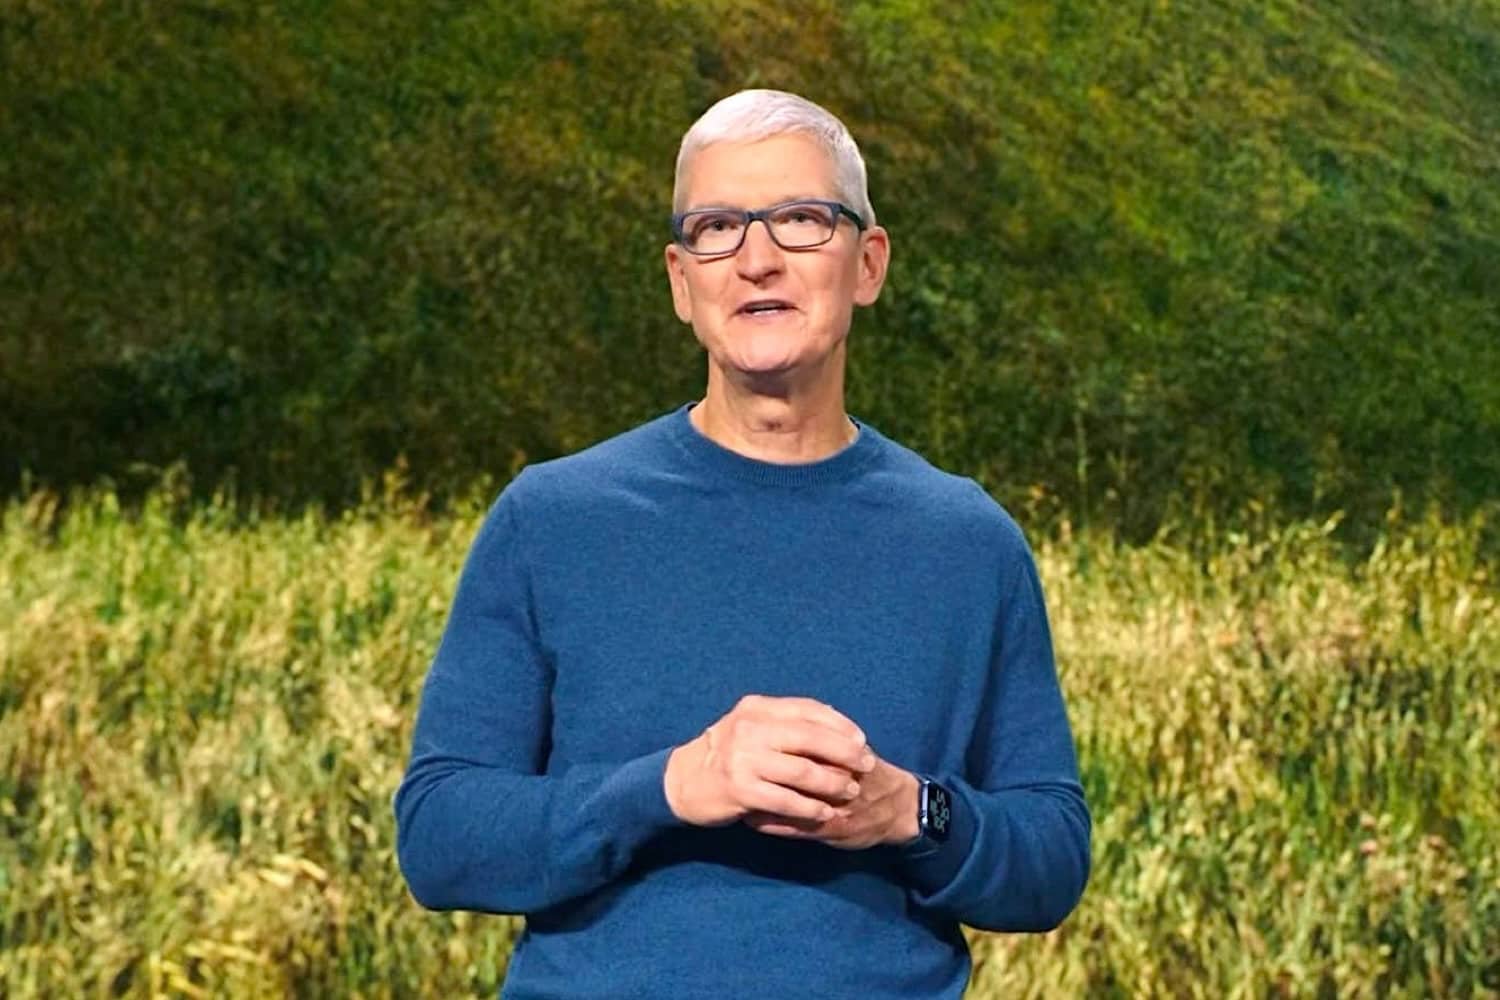 Apple Tim Cook could announce AI as early as next week